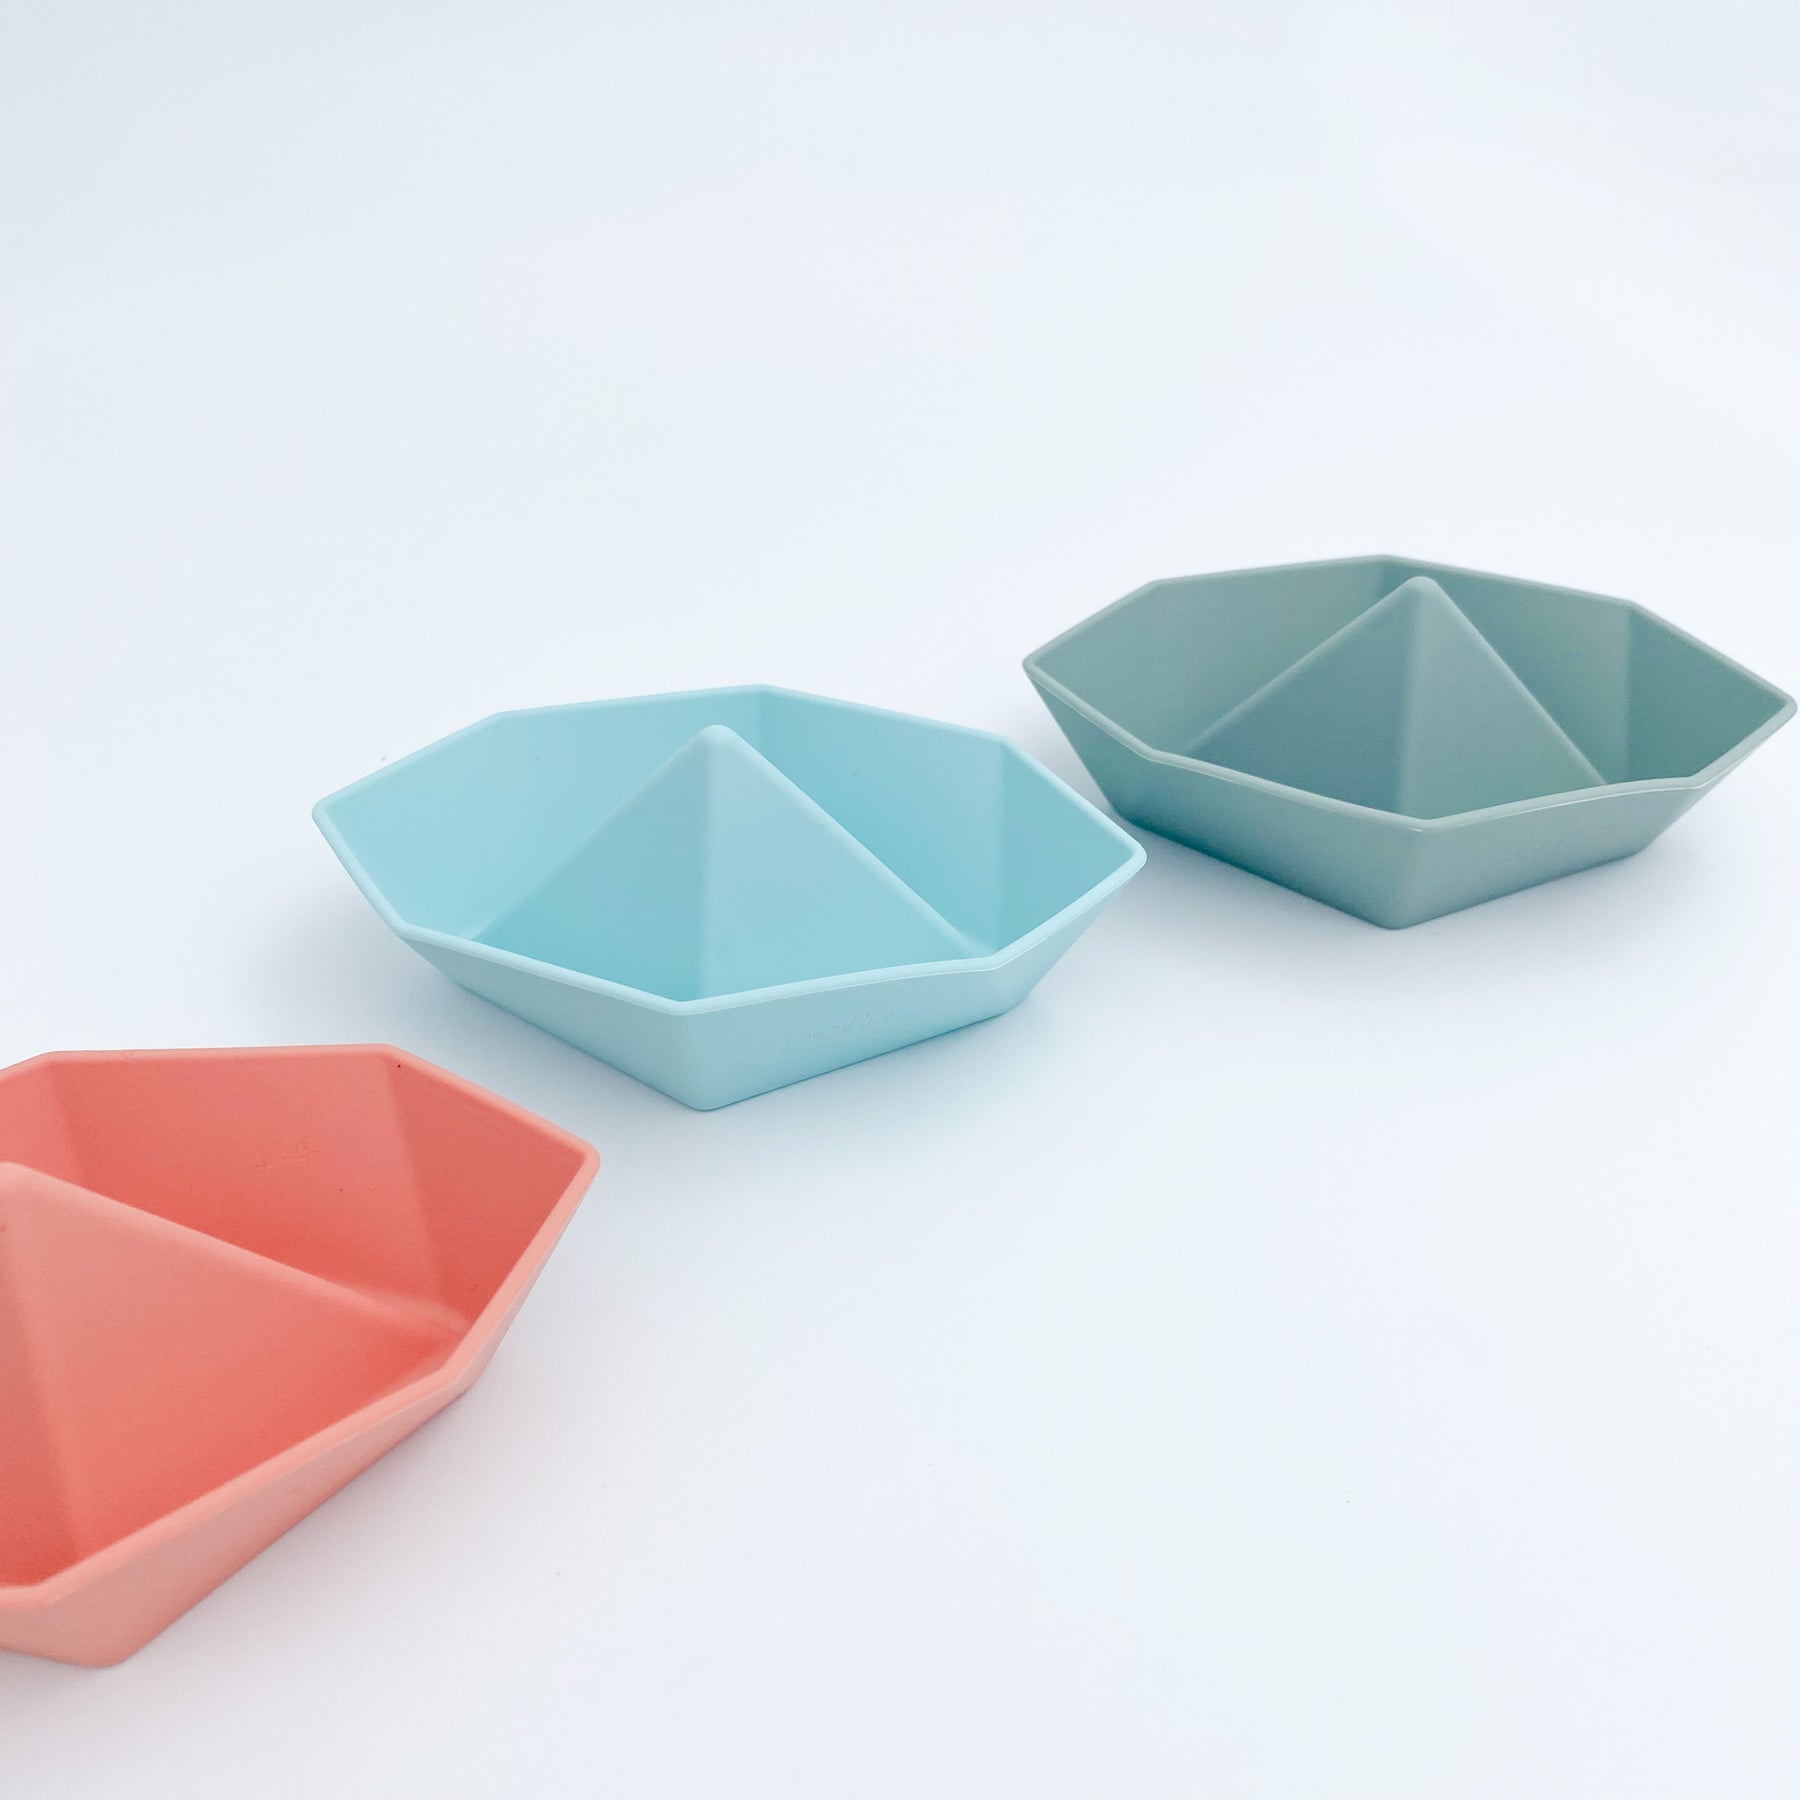 Silicone Bath Toy - Origami Boats (set of 3)